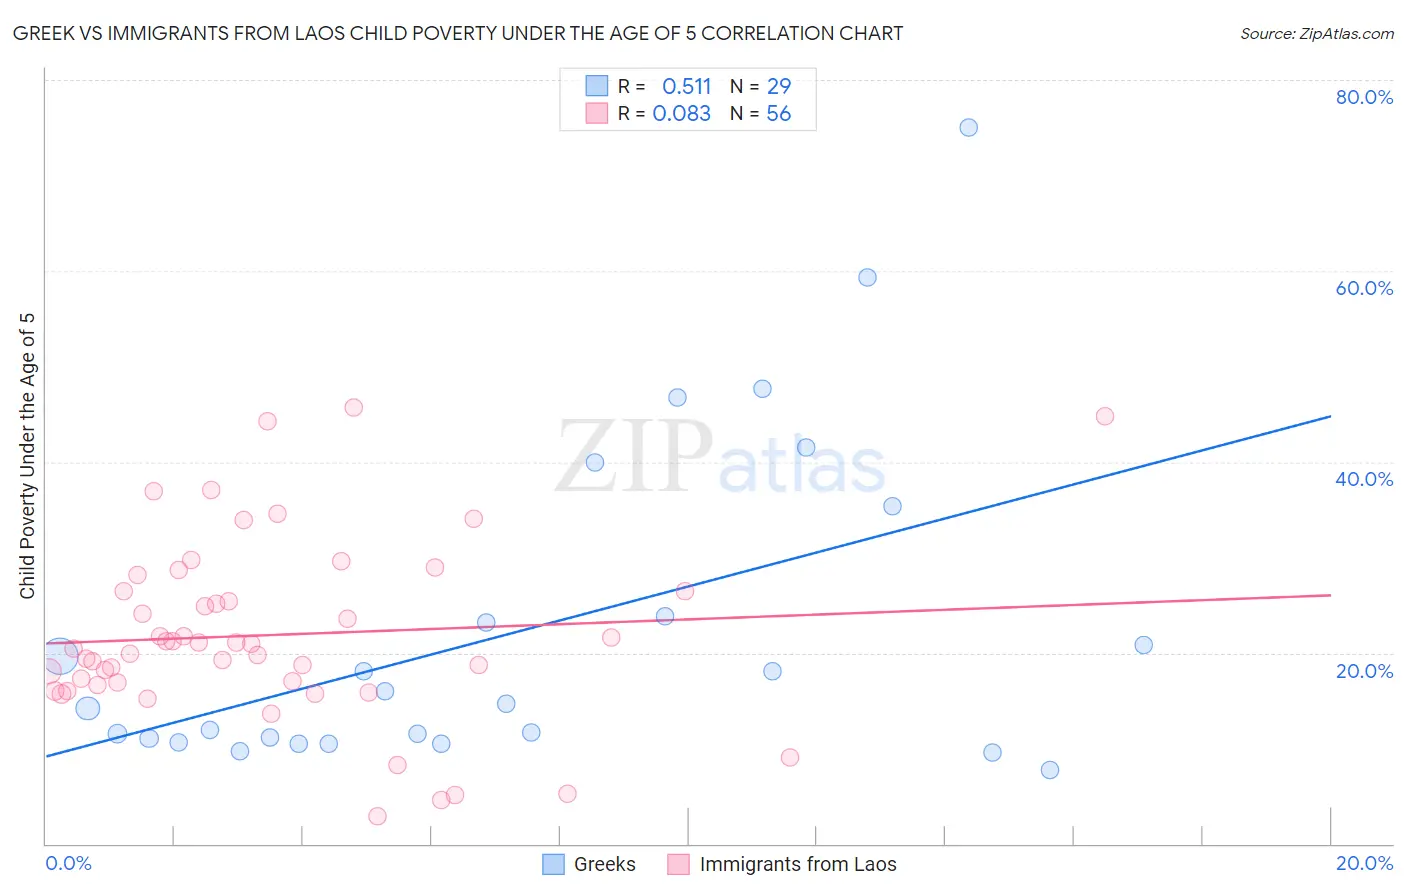 Greek vs Immigrants from Laos Child Poverty Under the Age of 5